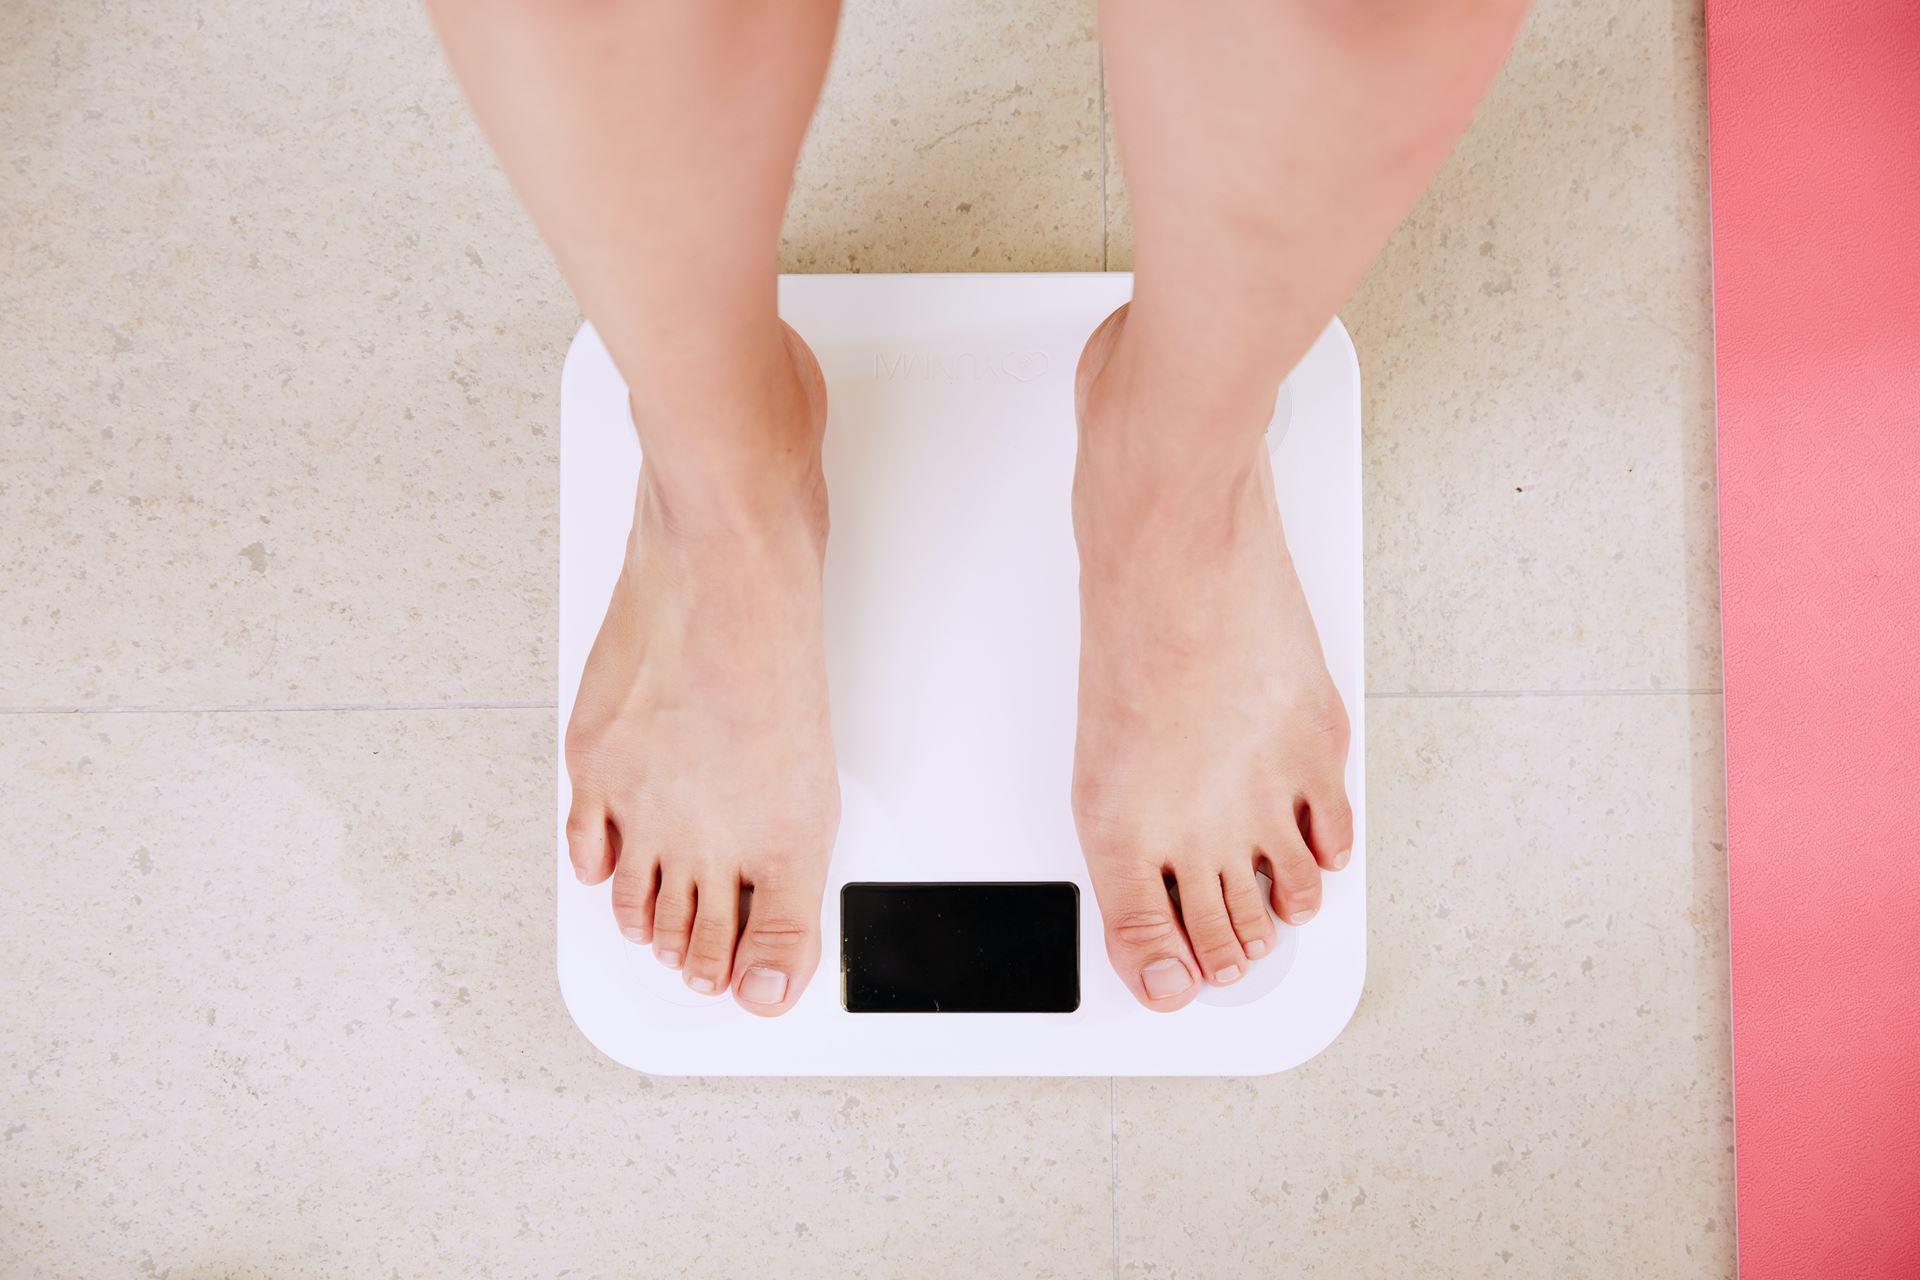 A person's feet standing on weighing scales